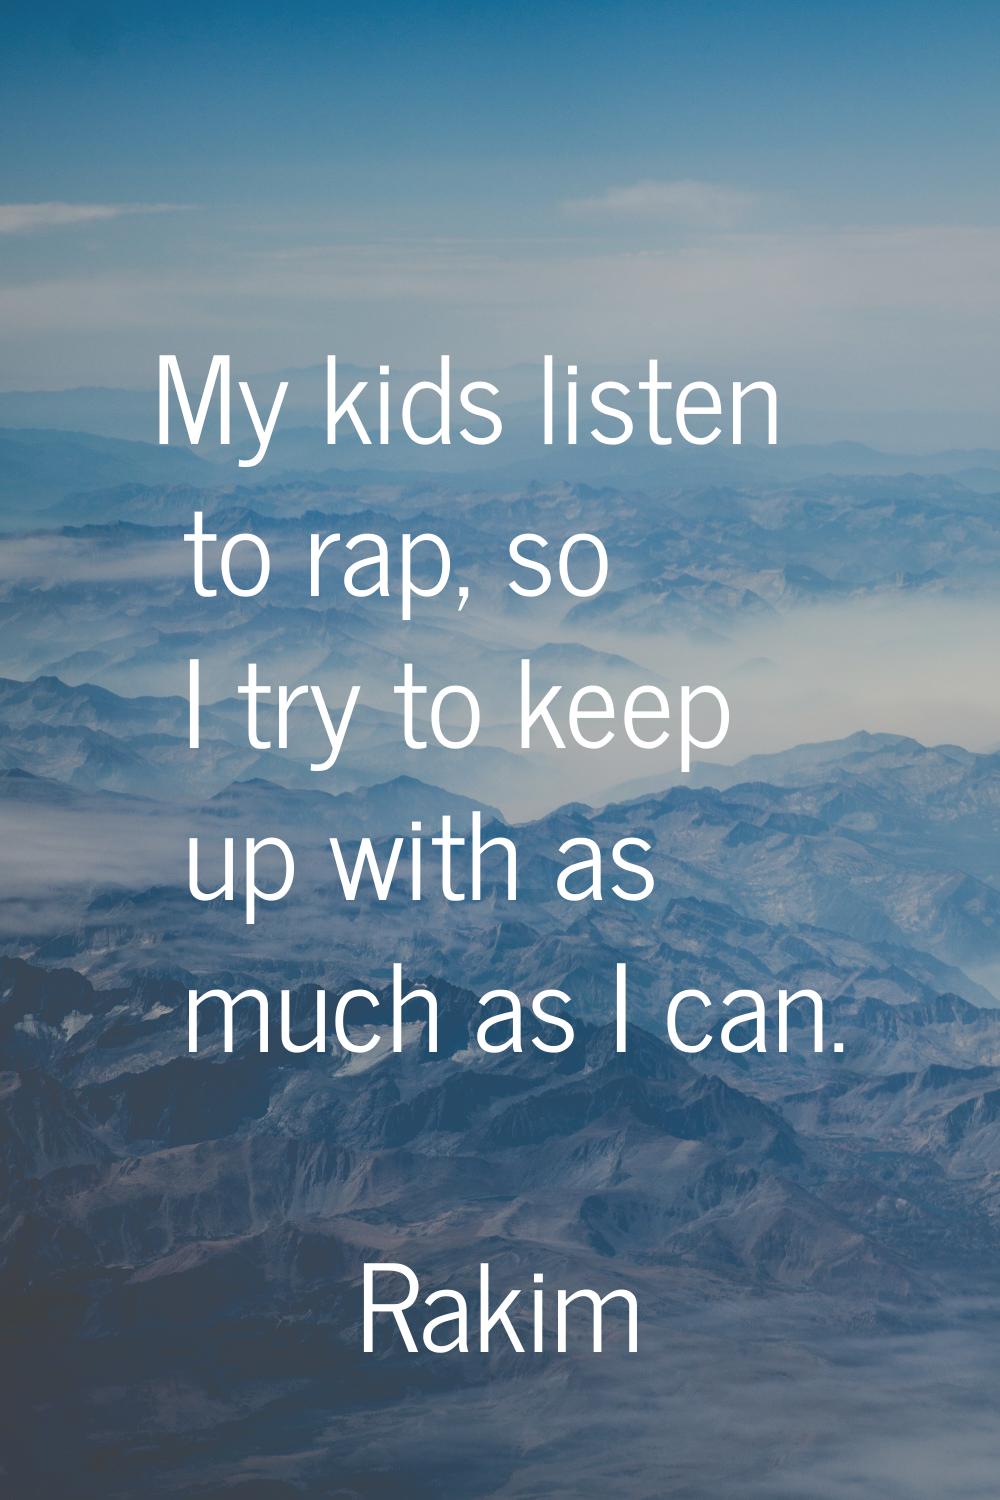 My kids listen to rap, so I try to keep up with as much as I can.